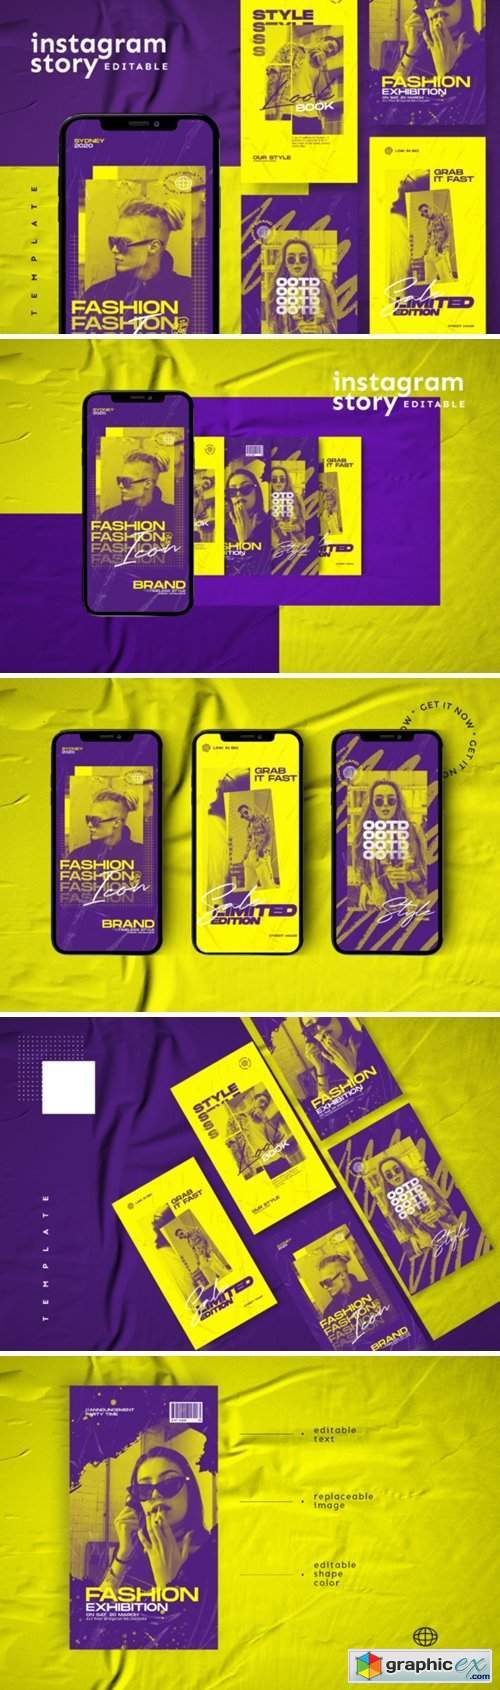 Instagram Story Template 3483496